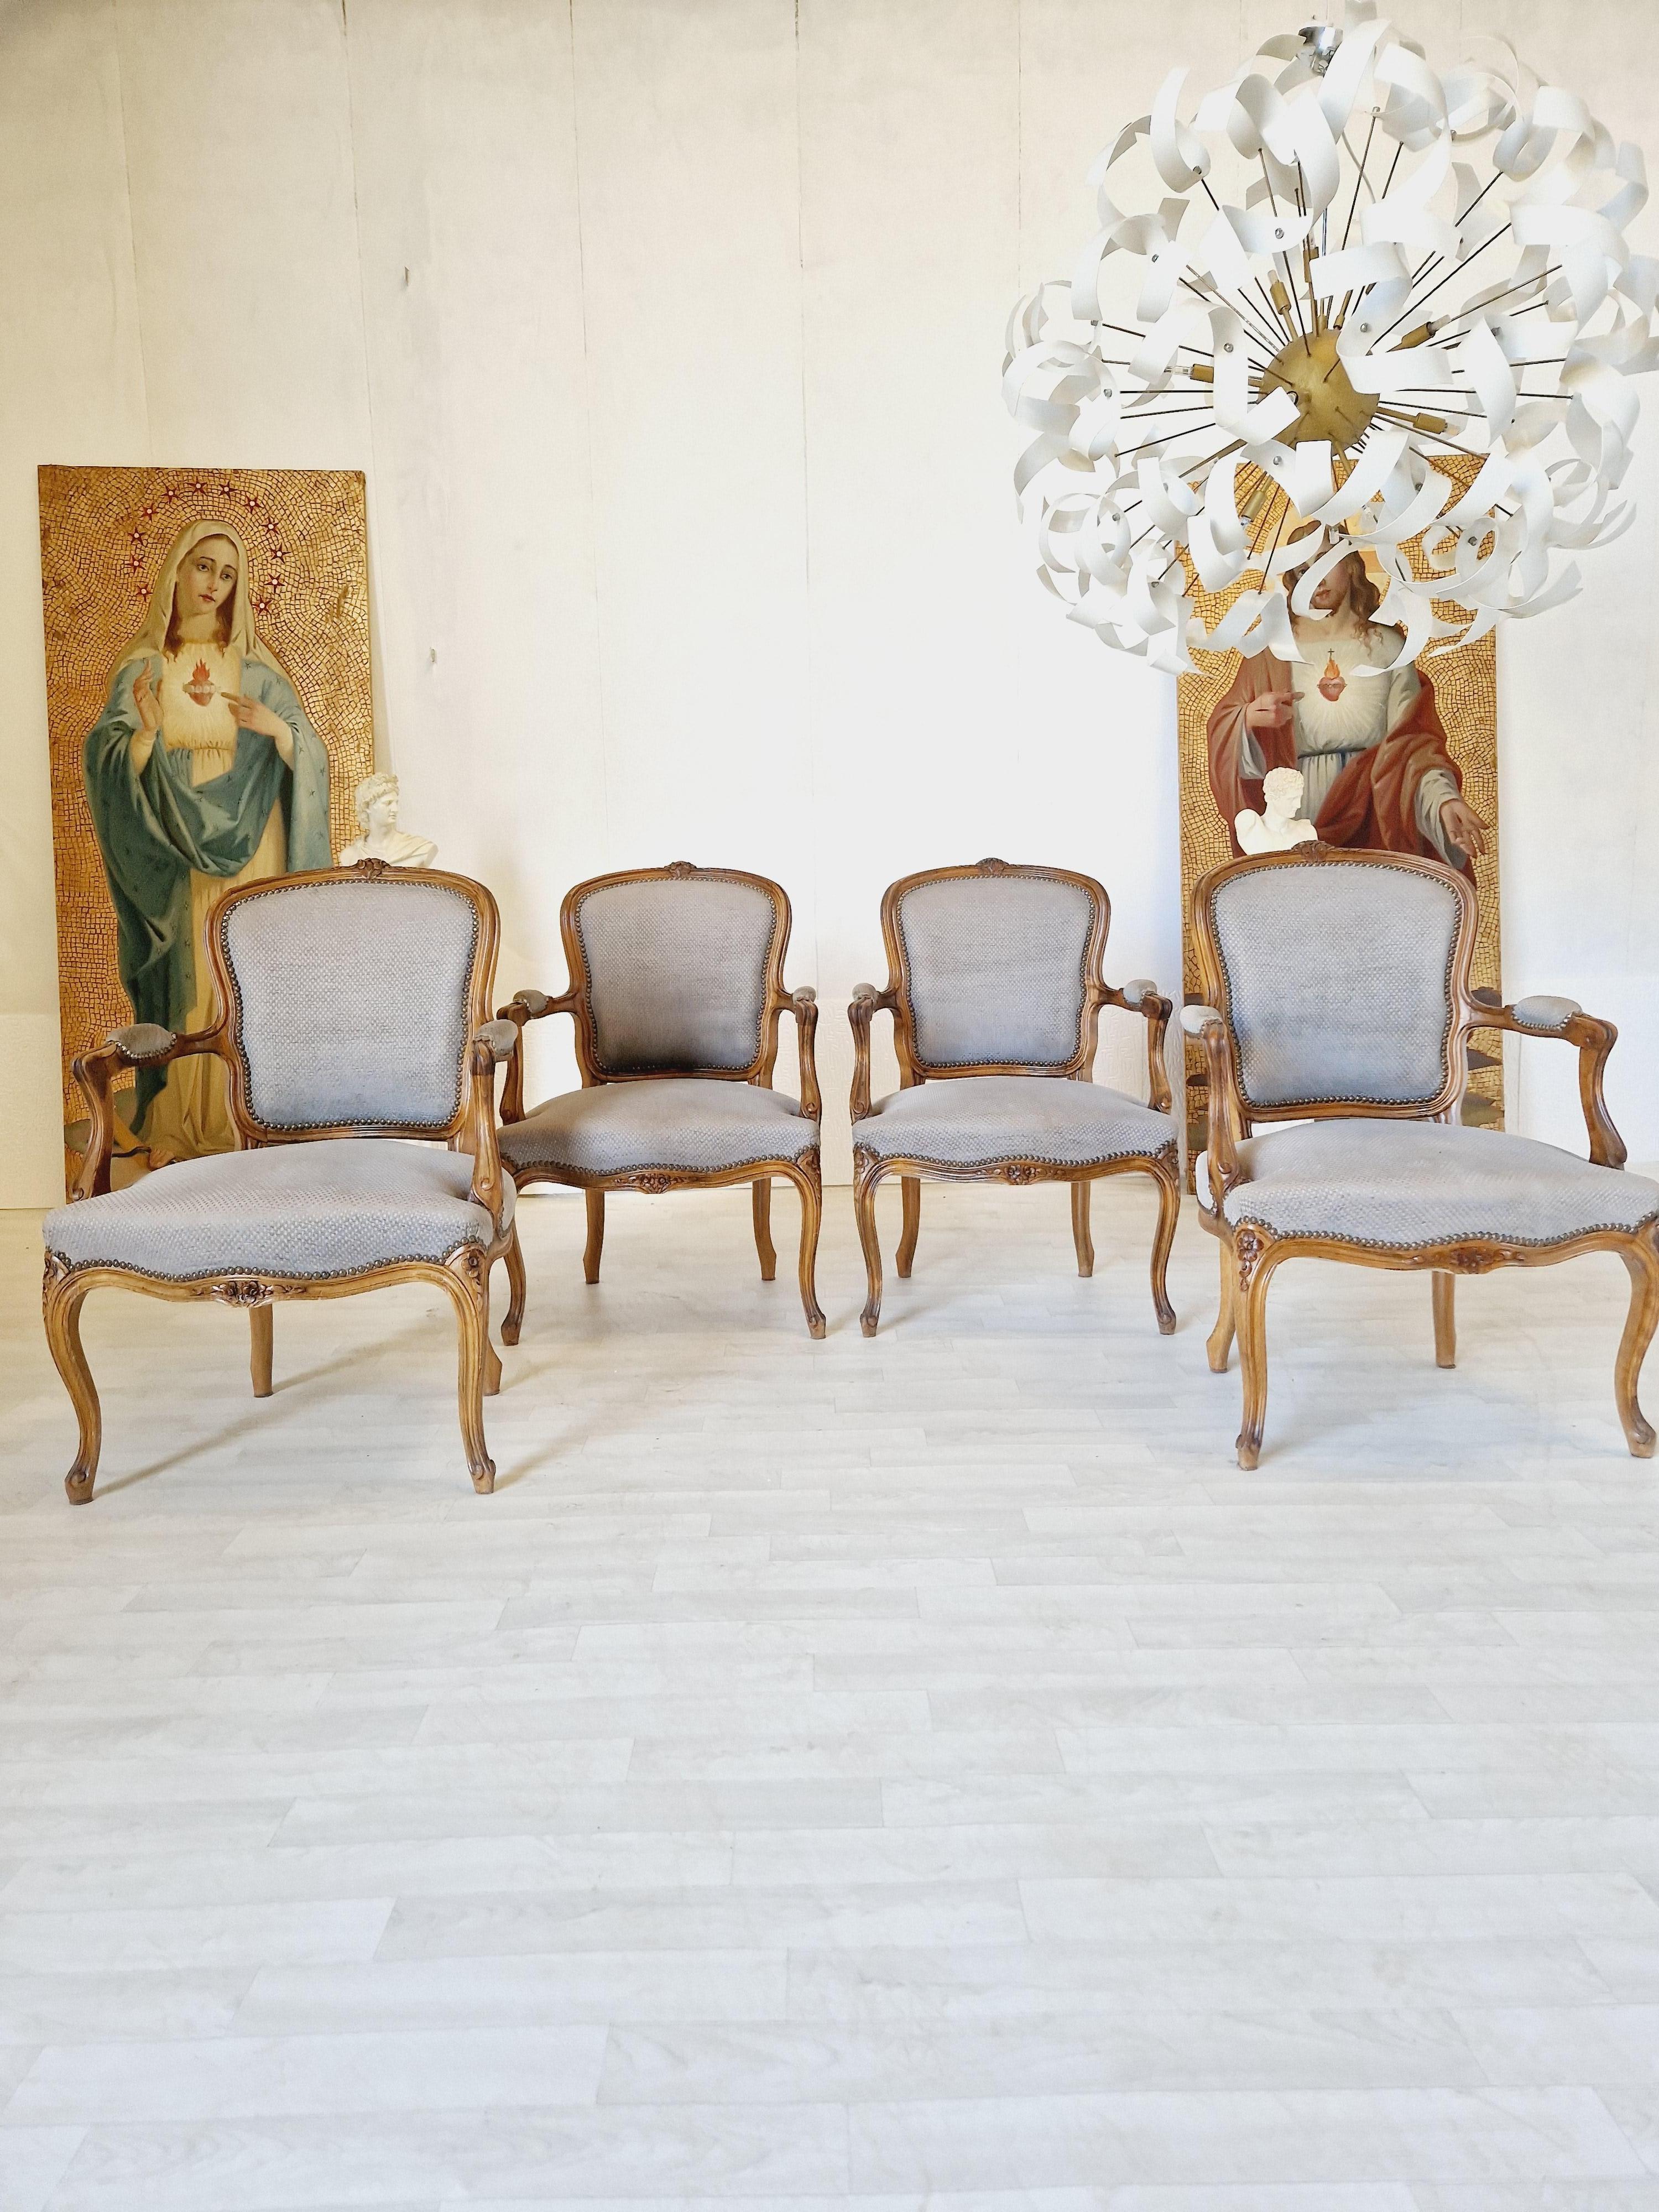 Set ofx4 French Louis XV Style Armchairs with Grey Upholstery.

Circa 1920.beautiful carved Walnut woodwork in good condition. On the upholstered Grey Seats there are some slight marks to the arm rests in line with age and use.

The chairs of the